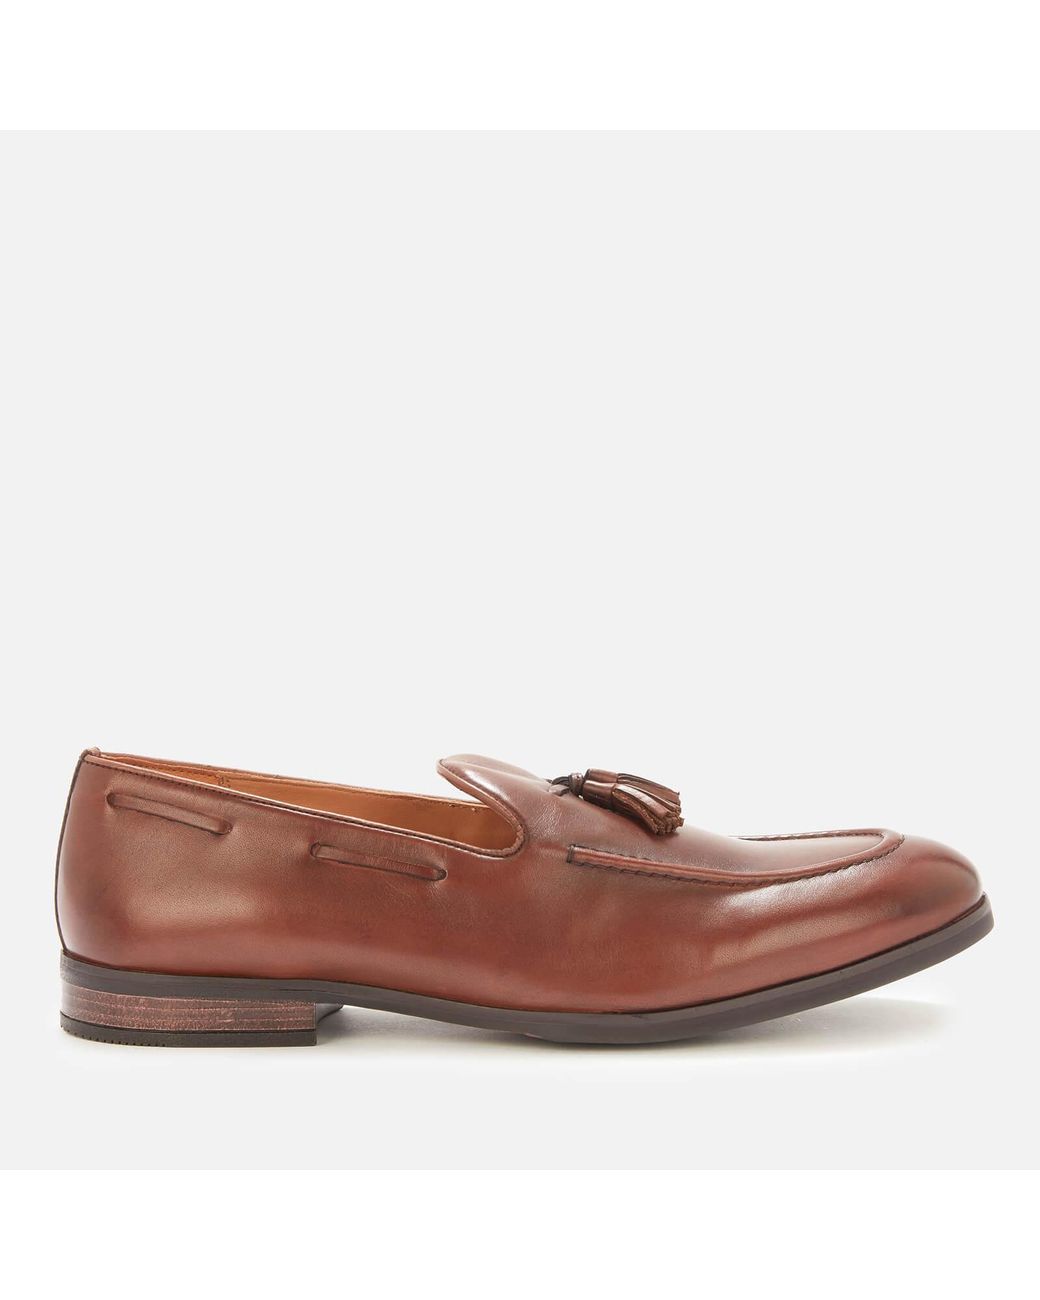 Clarks Citistrideslip Leather Loafers in Tan (Brown) | Lyst